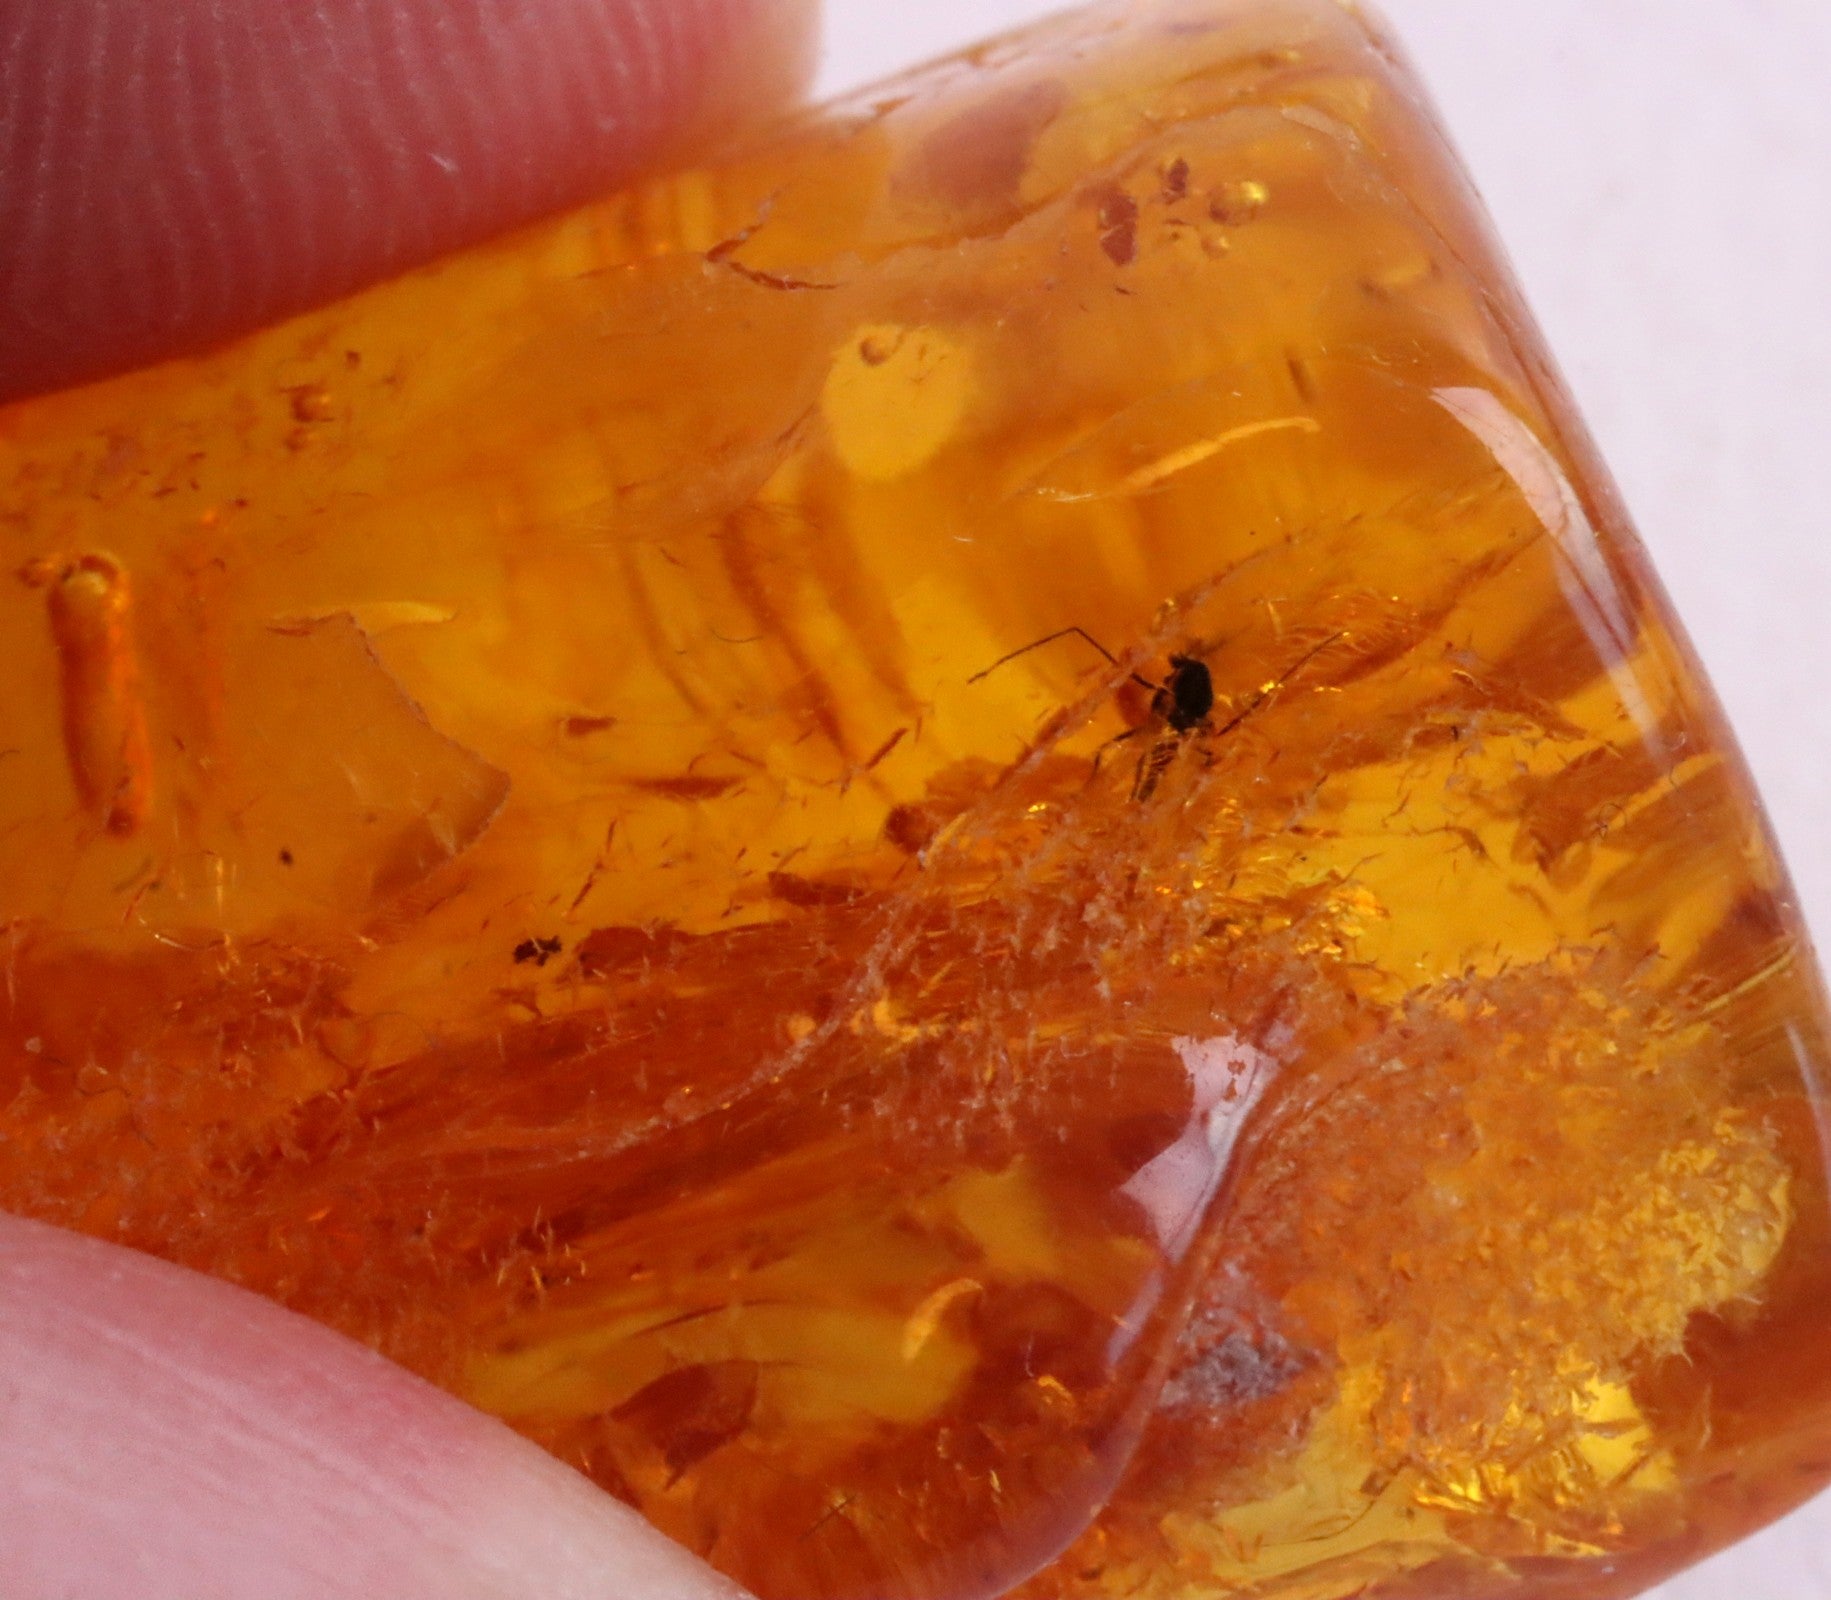 Baltic Amber Gem With Insect Inclusions